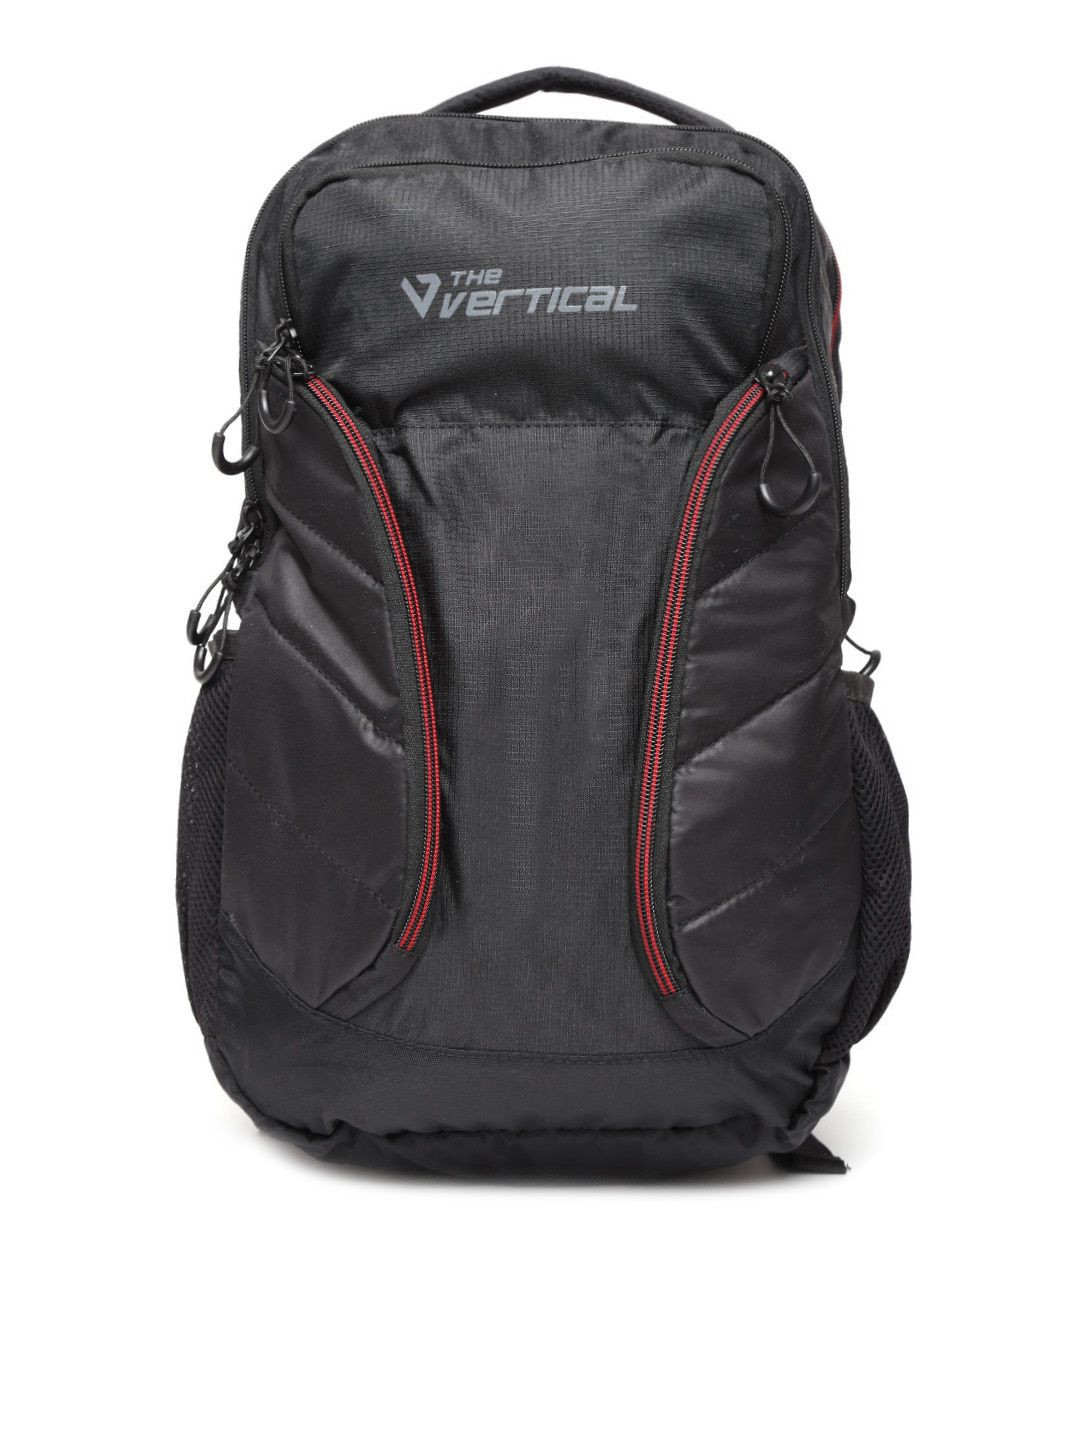 THe VerTicaL Unisex Black Water-Resistant Patterned Laptop Backpack Price in India